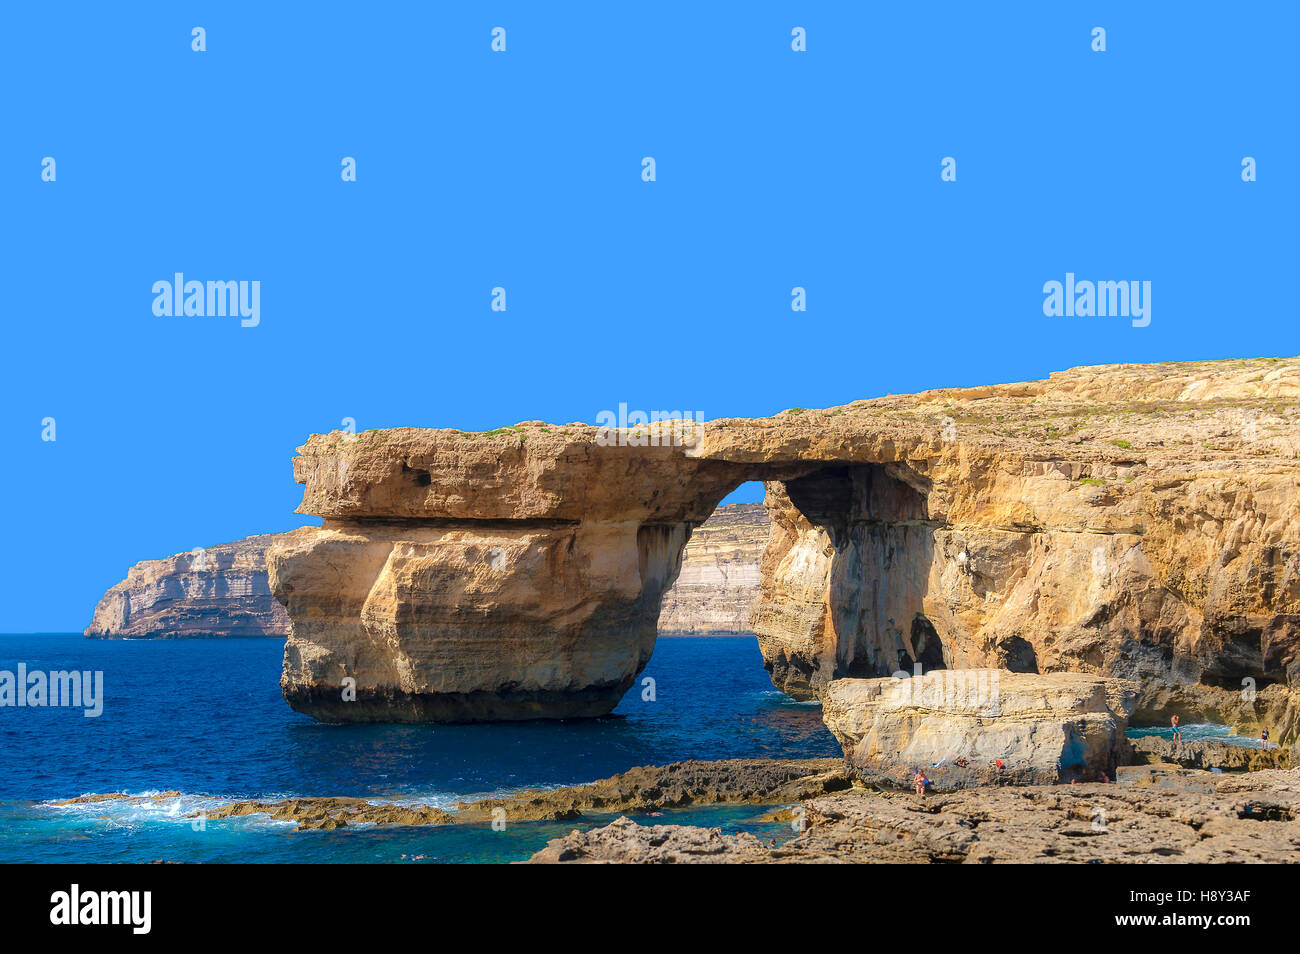 Gozo, Malta. Famous Azure Window or Tieqa Zerqa. Enormous natural limestone arch, one of the biggest attractions of miniscule Malta's sister island. Stock Photo